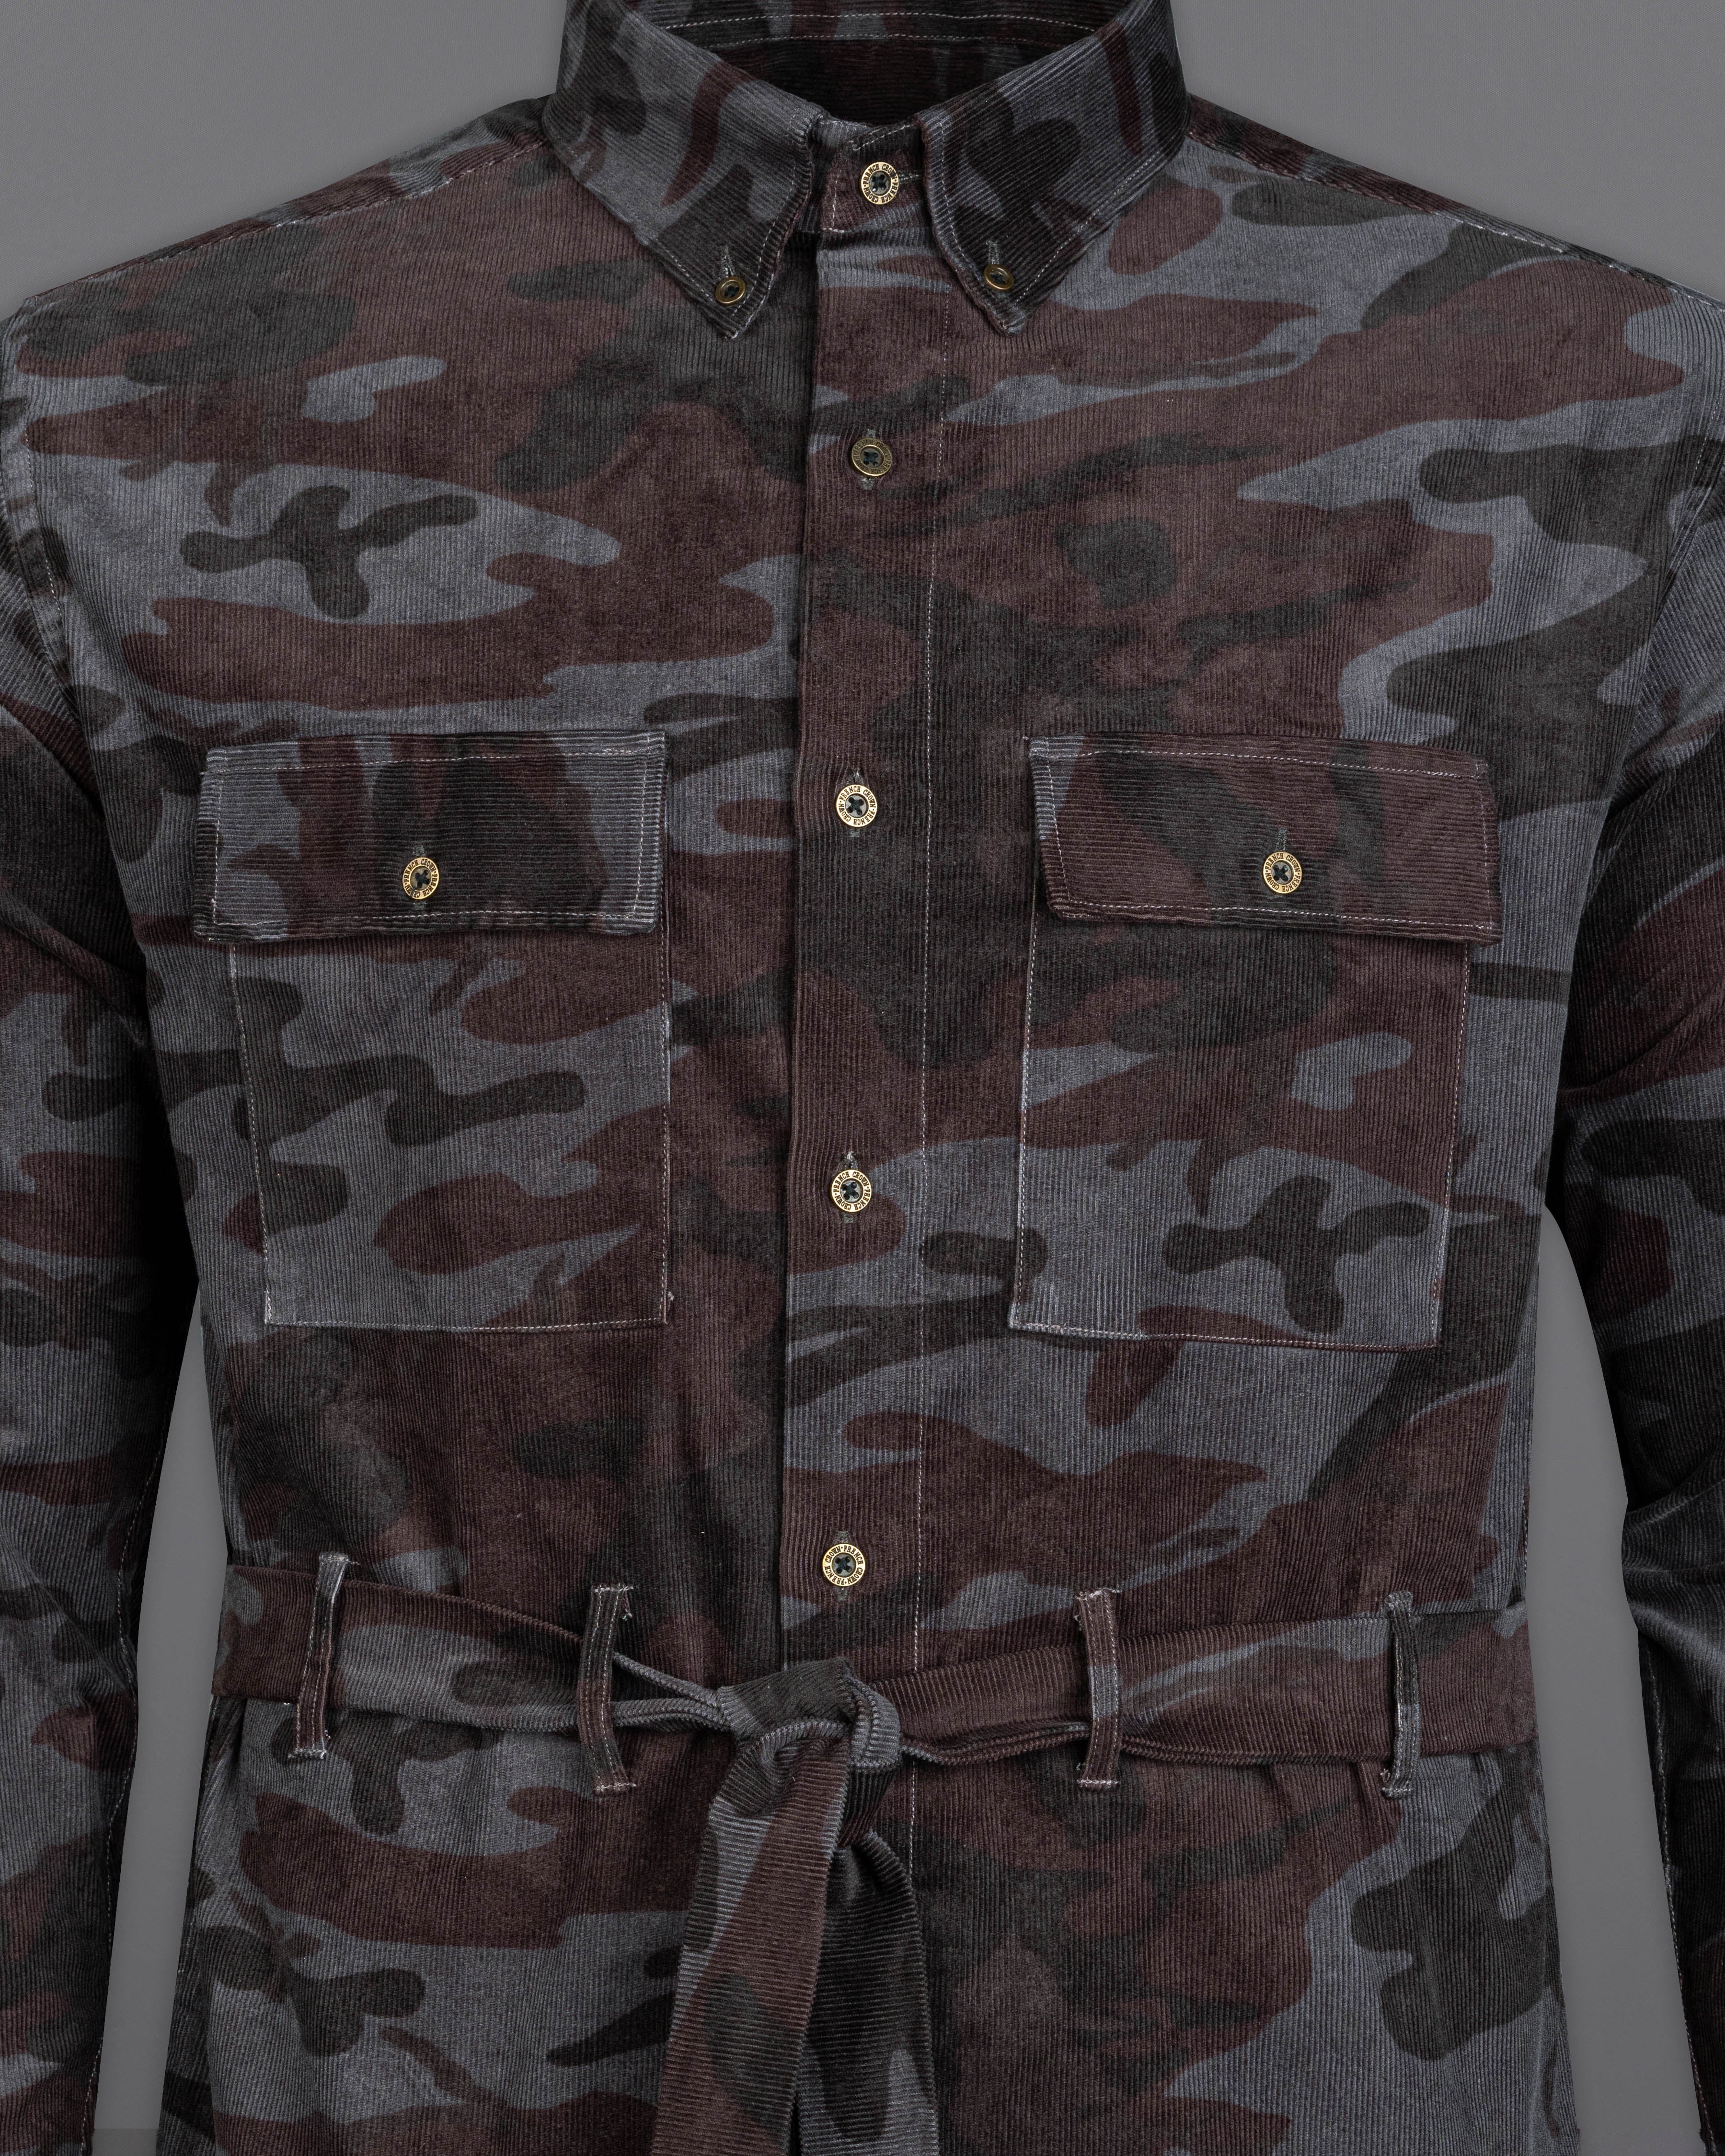 Cape Cod Gray and Bistre Brown Camouflage Corduroy Designer Shirt 10174-BD-MB-D123-38, 10174-BD-MB-D123-H-38, 10174-BD-MB-D123-39, 10174-BD-MB-D123-H-39, 10174-BD-MB-D123-40, 10174-BD-MB-D123-H-40, 10174-BD-MB-D123-42, 10174-BD-MB-D123-H-42, 10174-BD-MB-D123-44, 10174-BD-MB-D123-H-44, 10174-BD-MB-D123-46, 10174-BD-MB-D123-H-46, 10174-BD-MB-D123-48, 10174-BD-MB-D123-H-48, 10174-BD-MB-D123-50, 10174-BD-MB-D123-H-50, 10174-BD-MB-D123-52, 10174-BD-MB-D123-H-52A